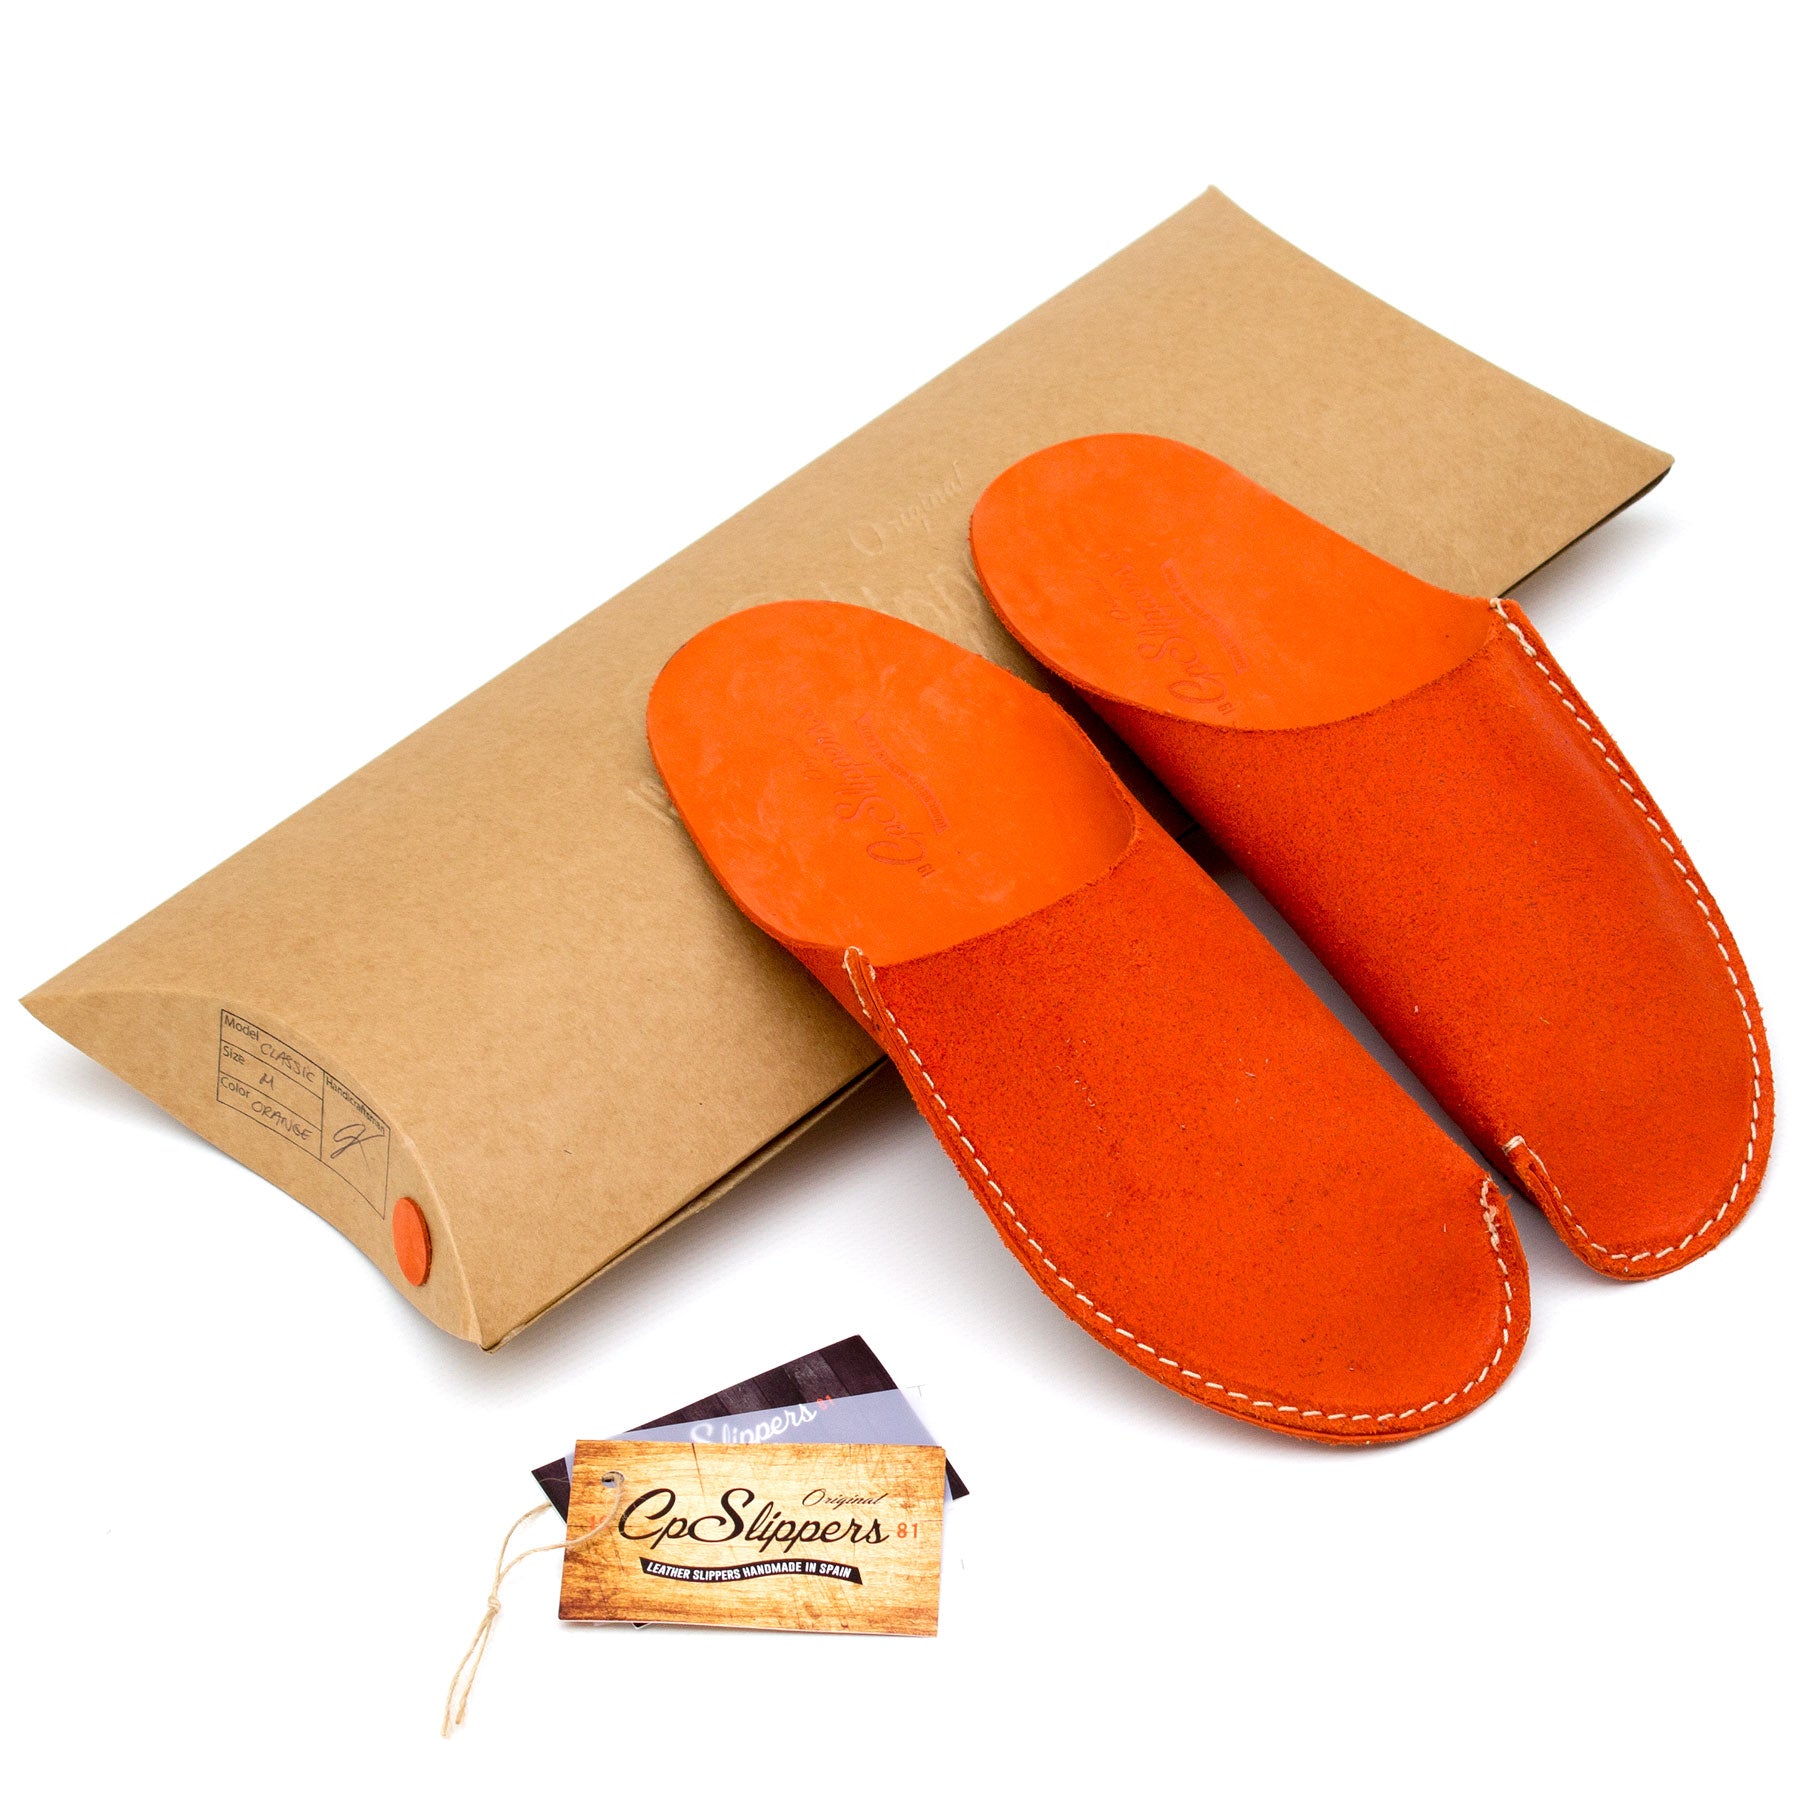 Orange CP Slippers minimalist collection home shoes